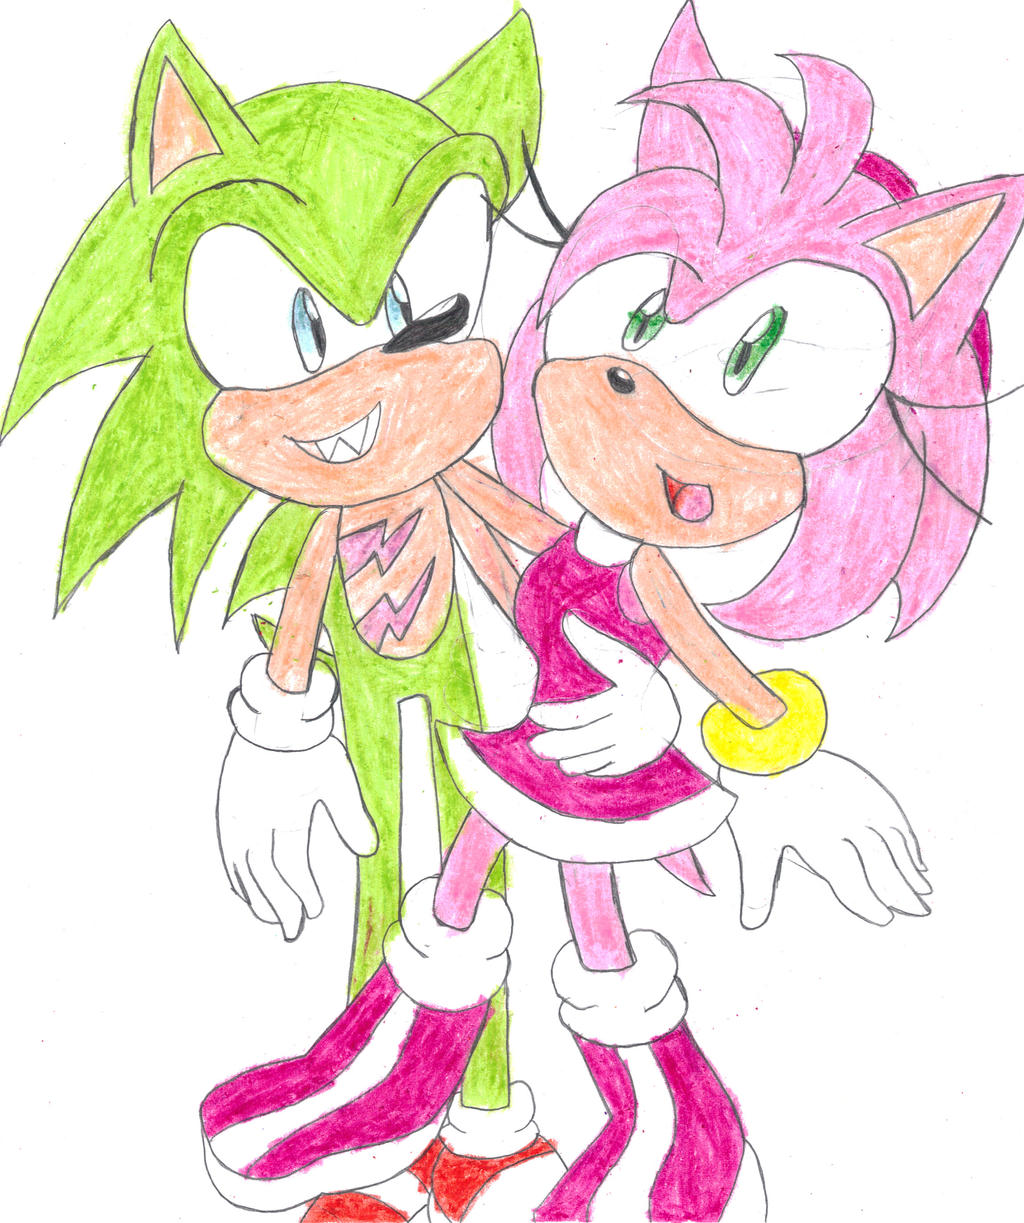 AmyxScourge on Sonic-All-Shipping - DeviantArt 